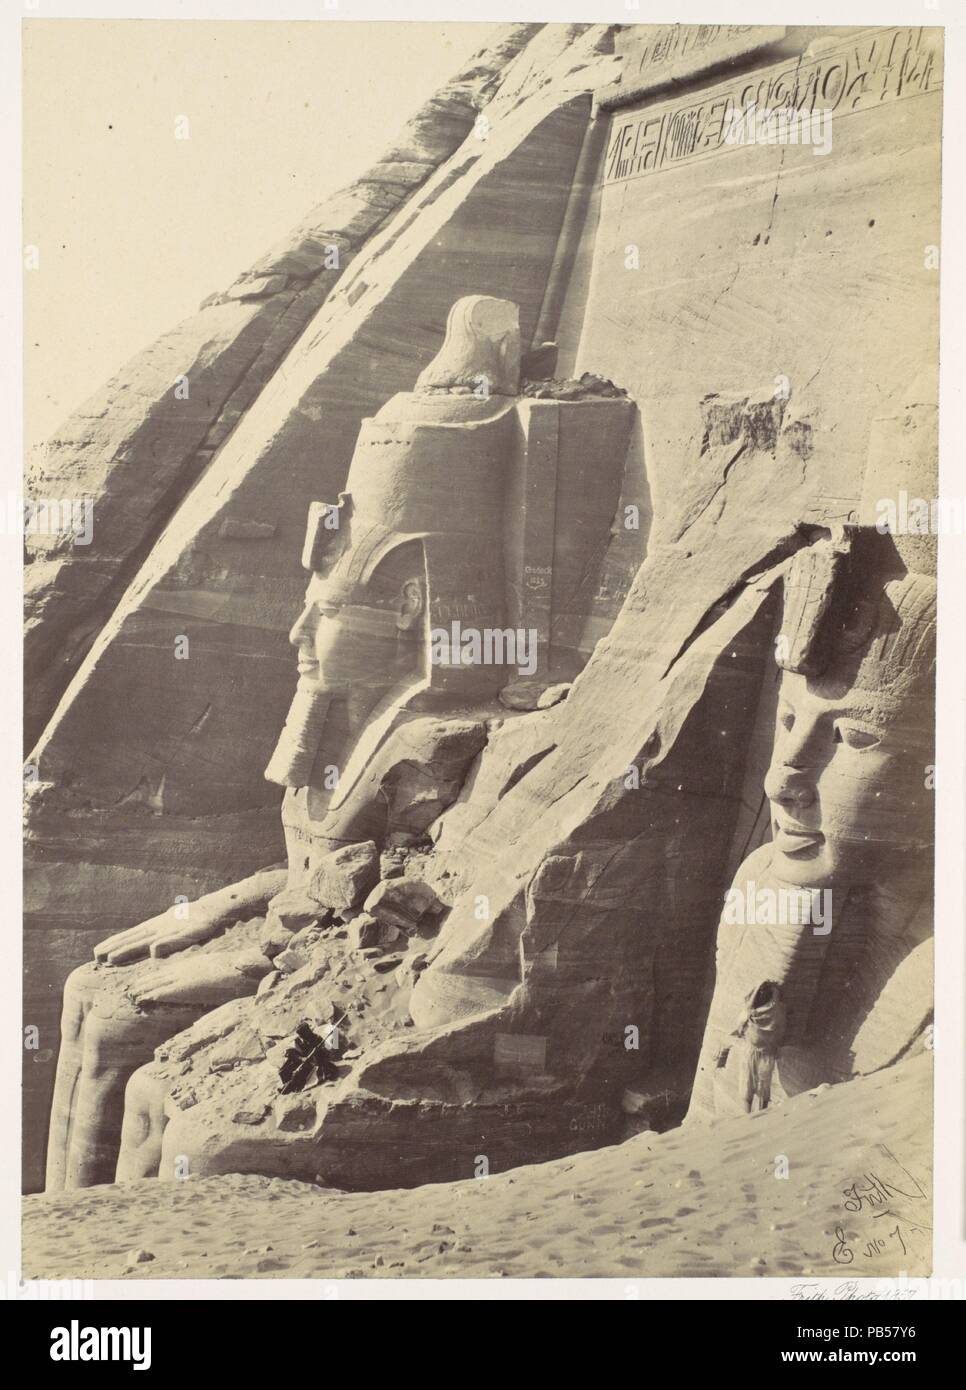 Abou Simbel, Nubia. Artiste : Francis Frith (British, Chesterfield, Derbyshire 1822-1898 Cannes, France). Date : 1857. Musée : Metropolitan Museum of Art, New York, USA. Banque D'Images